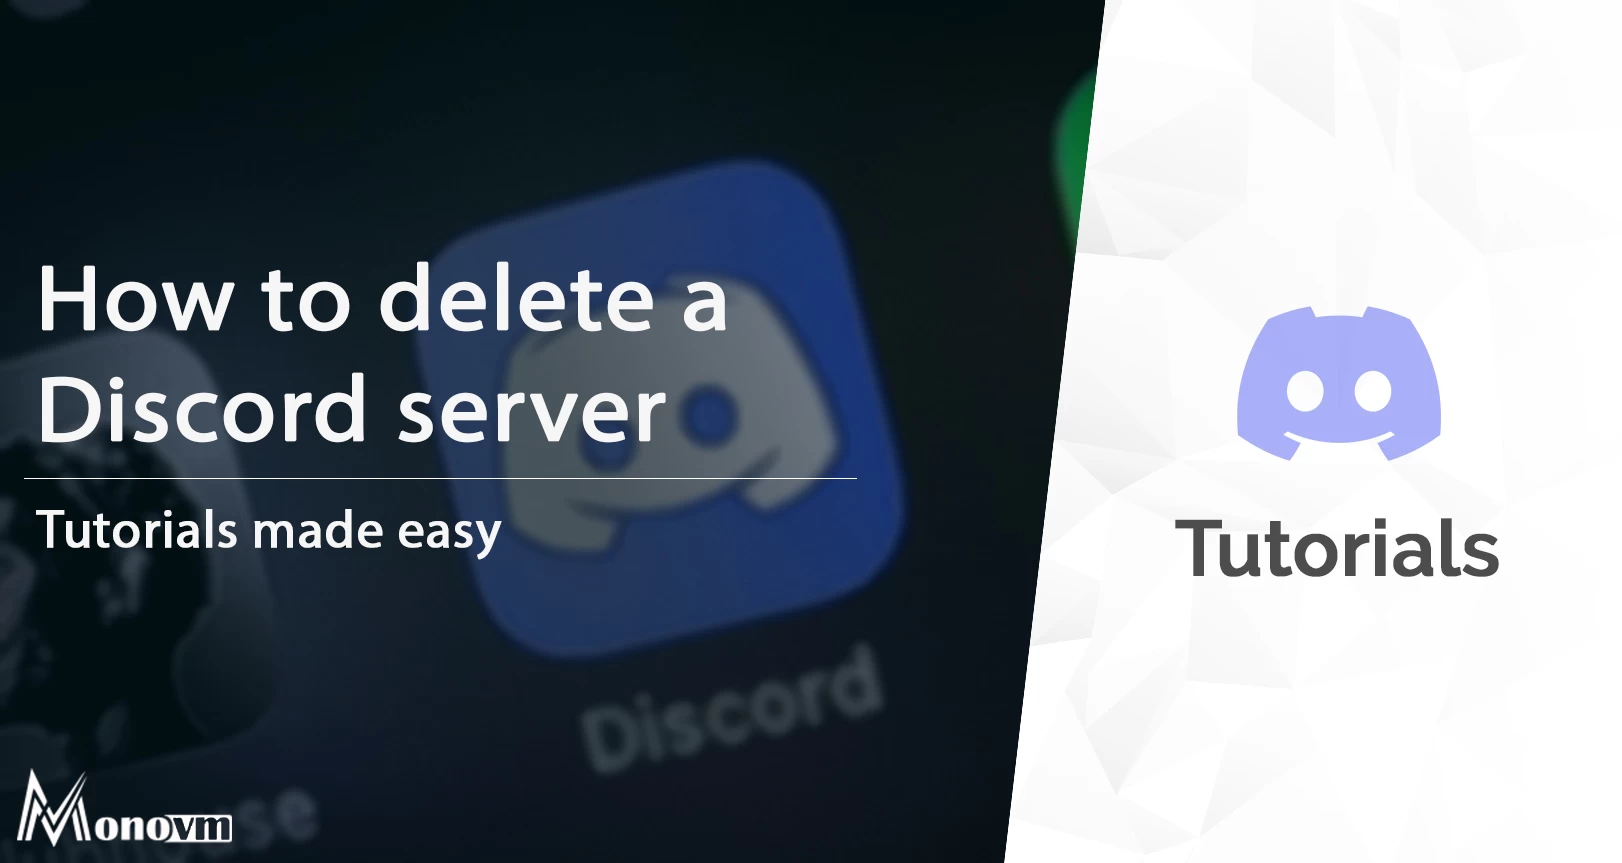 How to delete a Discord server?